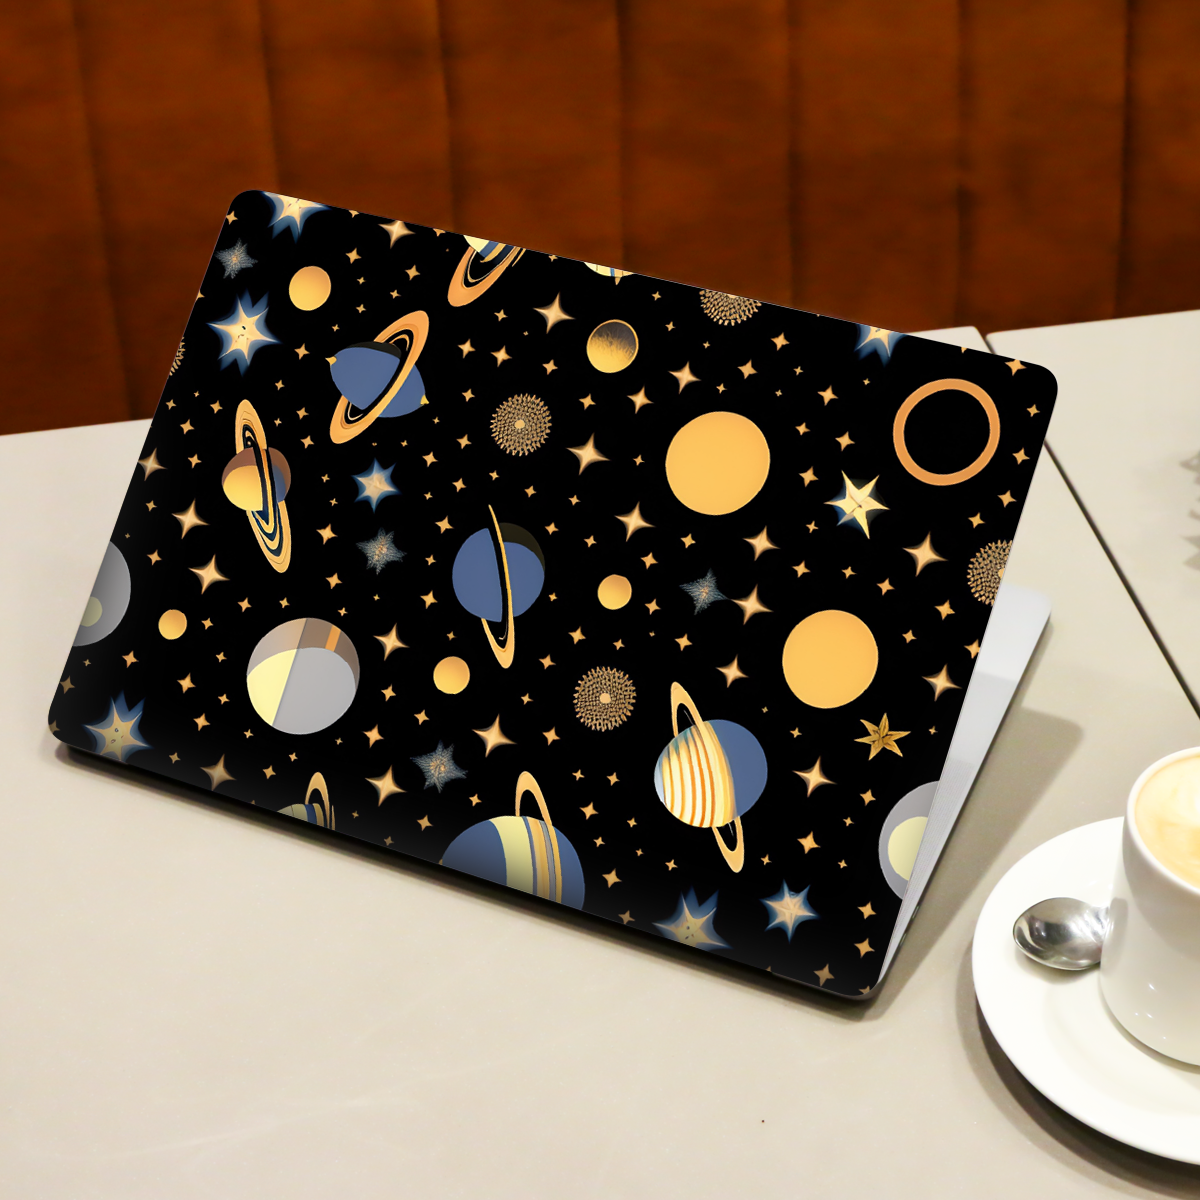 Planet and Starts Patterns Abstract Laptop Skin